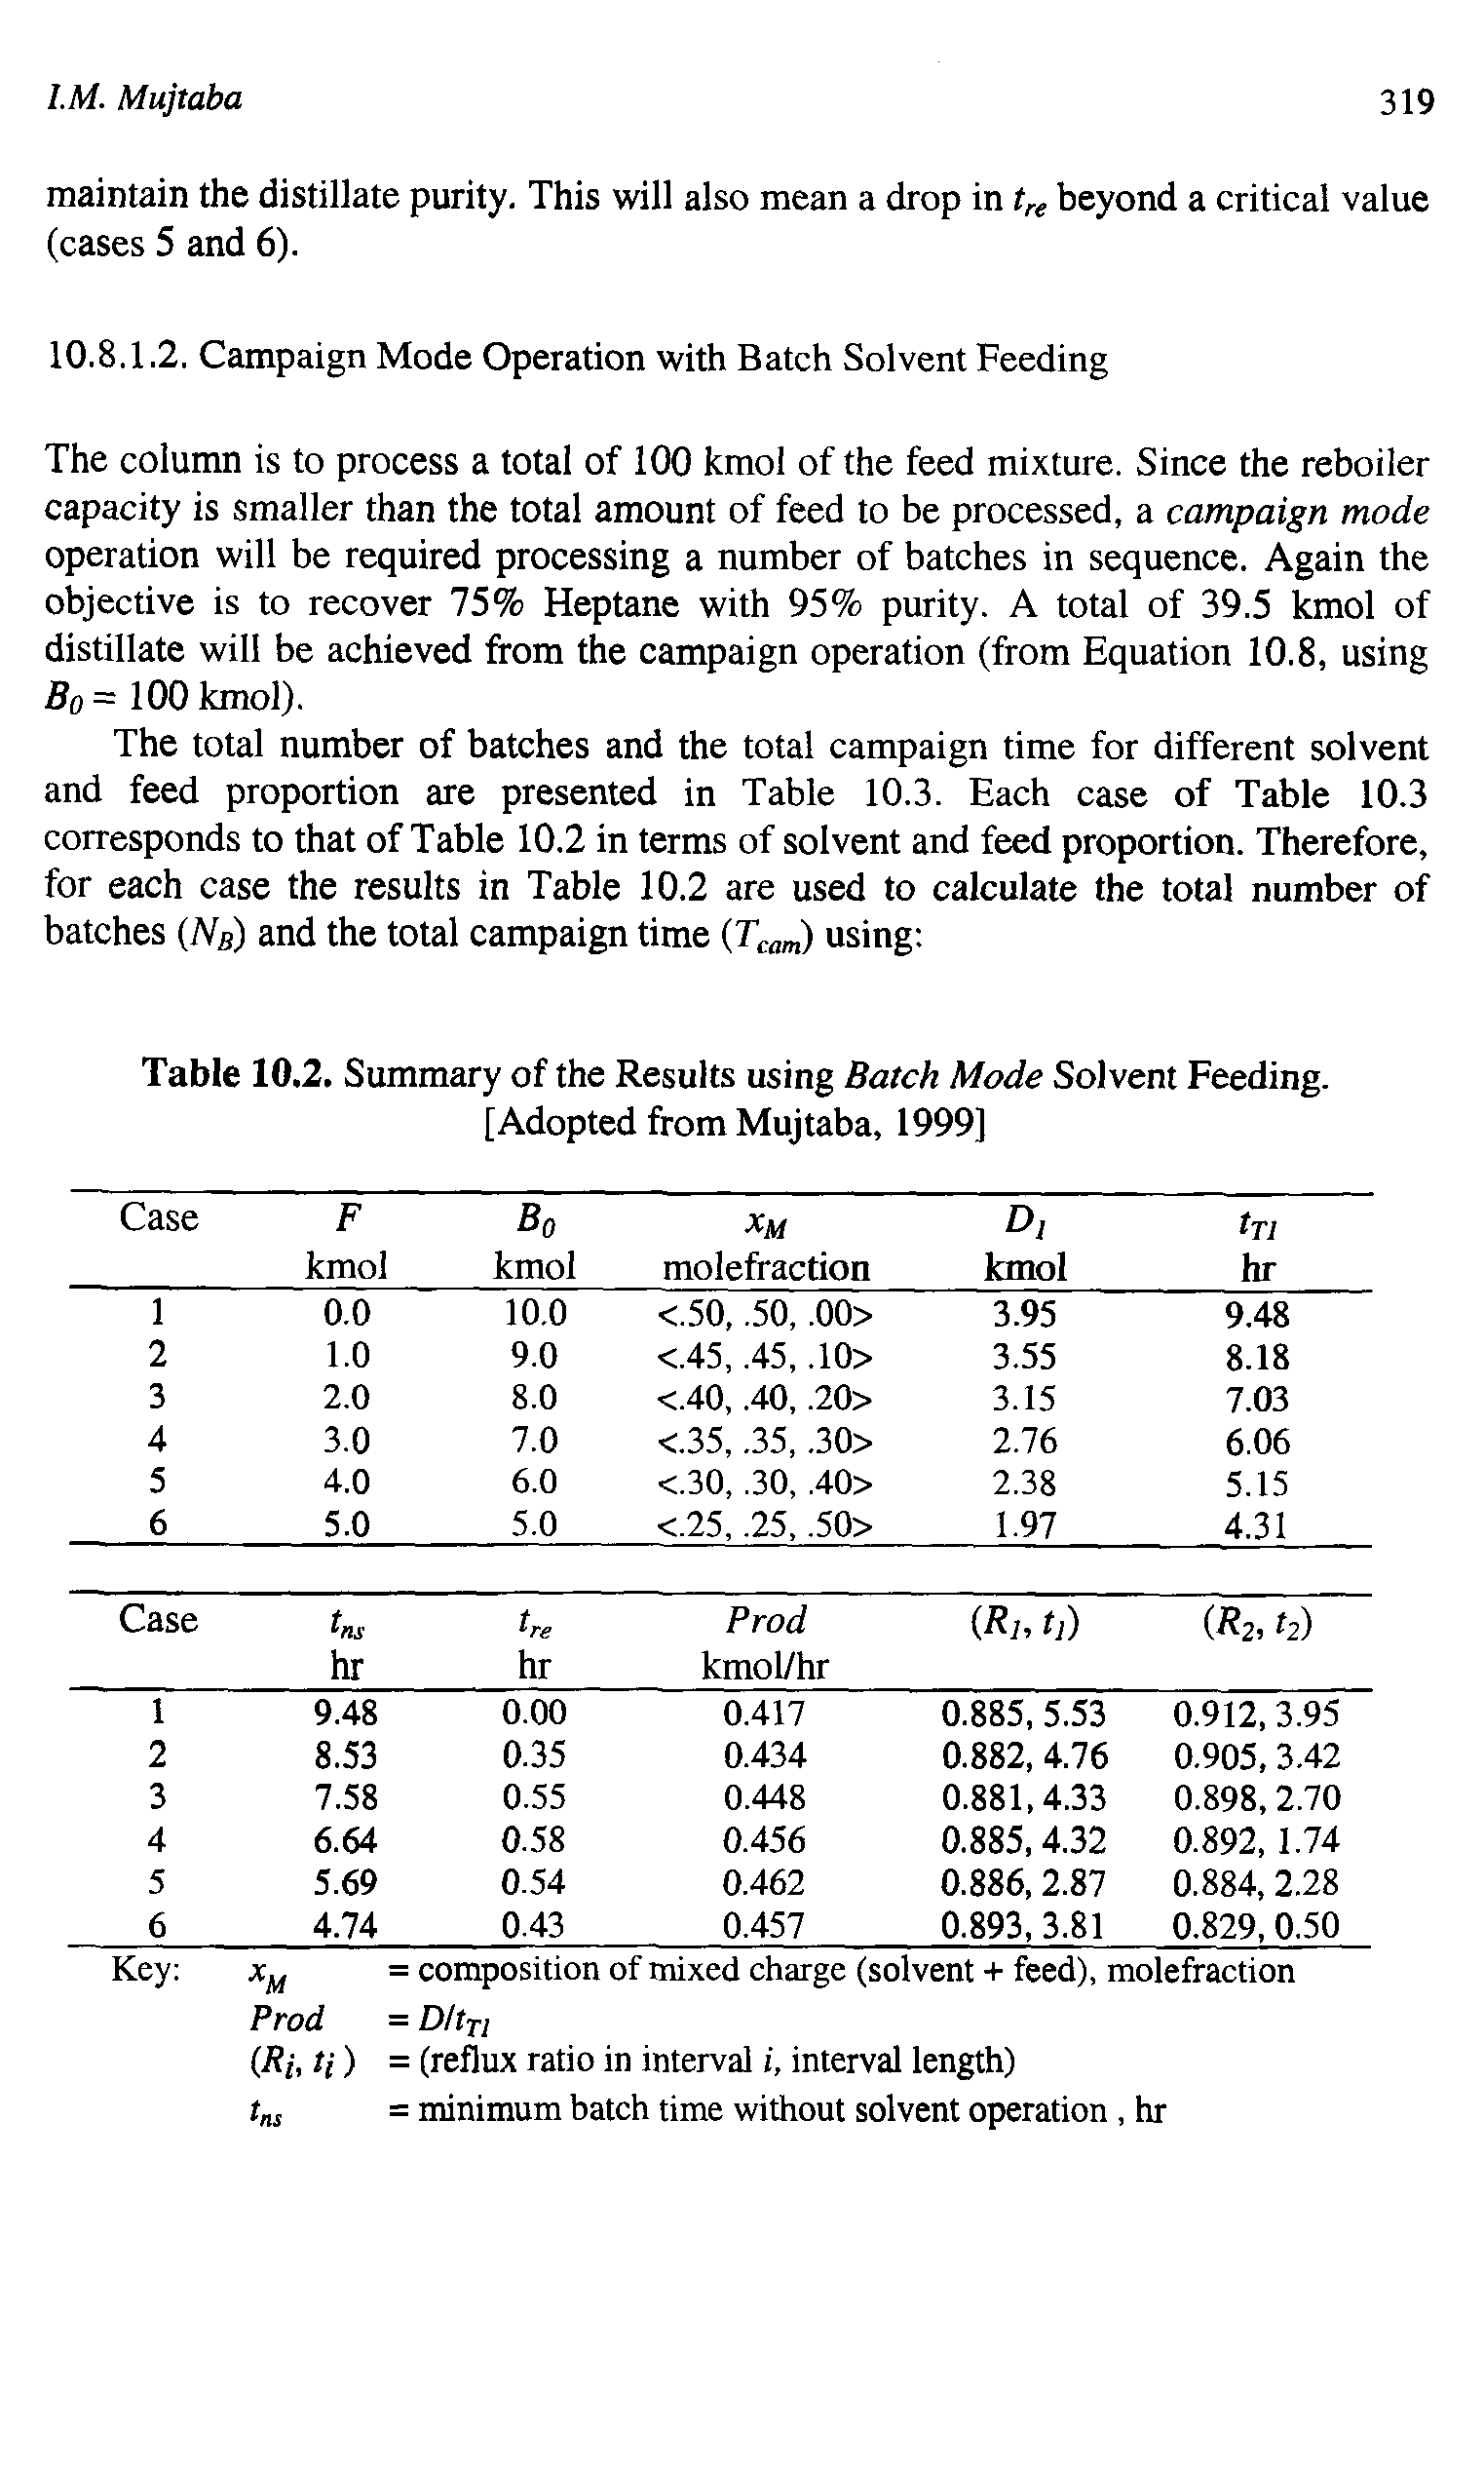 Table 10.2. Summary of the Results using Batch Mode Solvent Feeding. [Adopted from Mujtaba, 1999]...